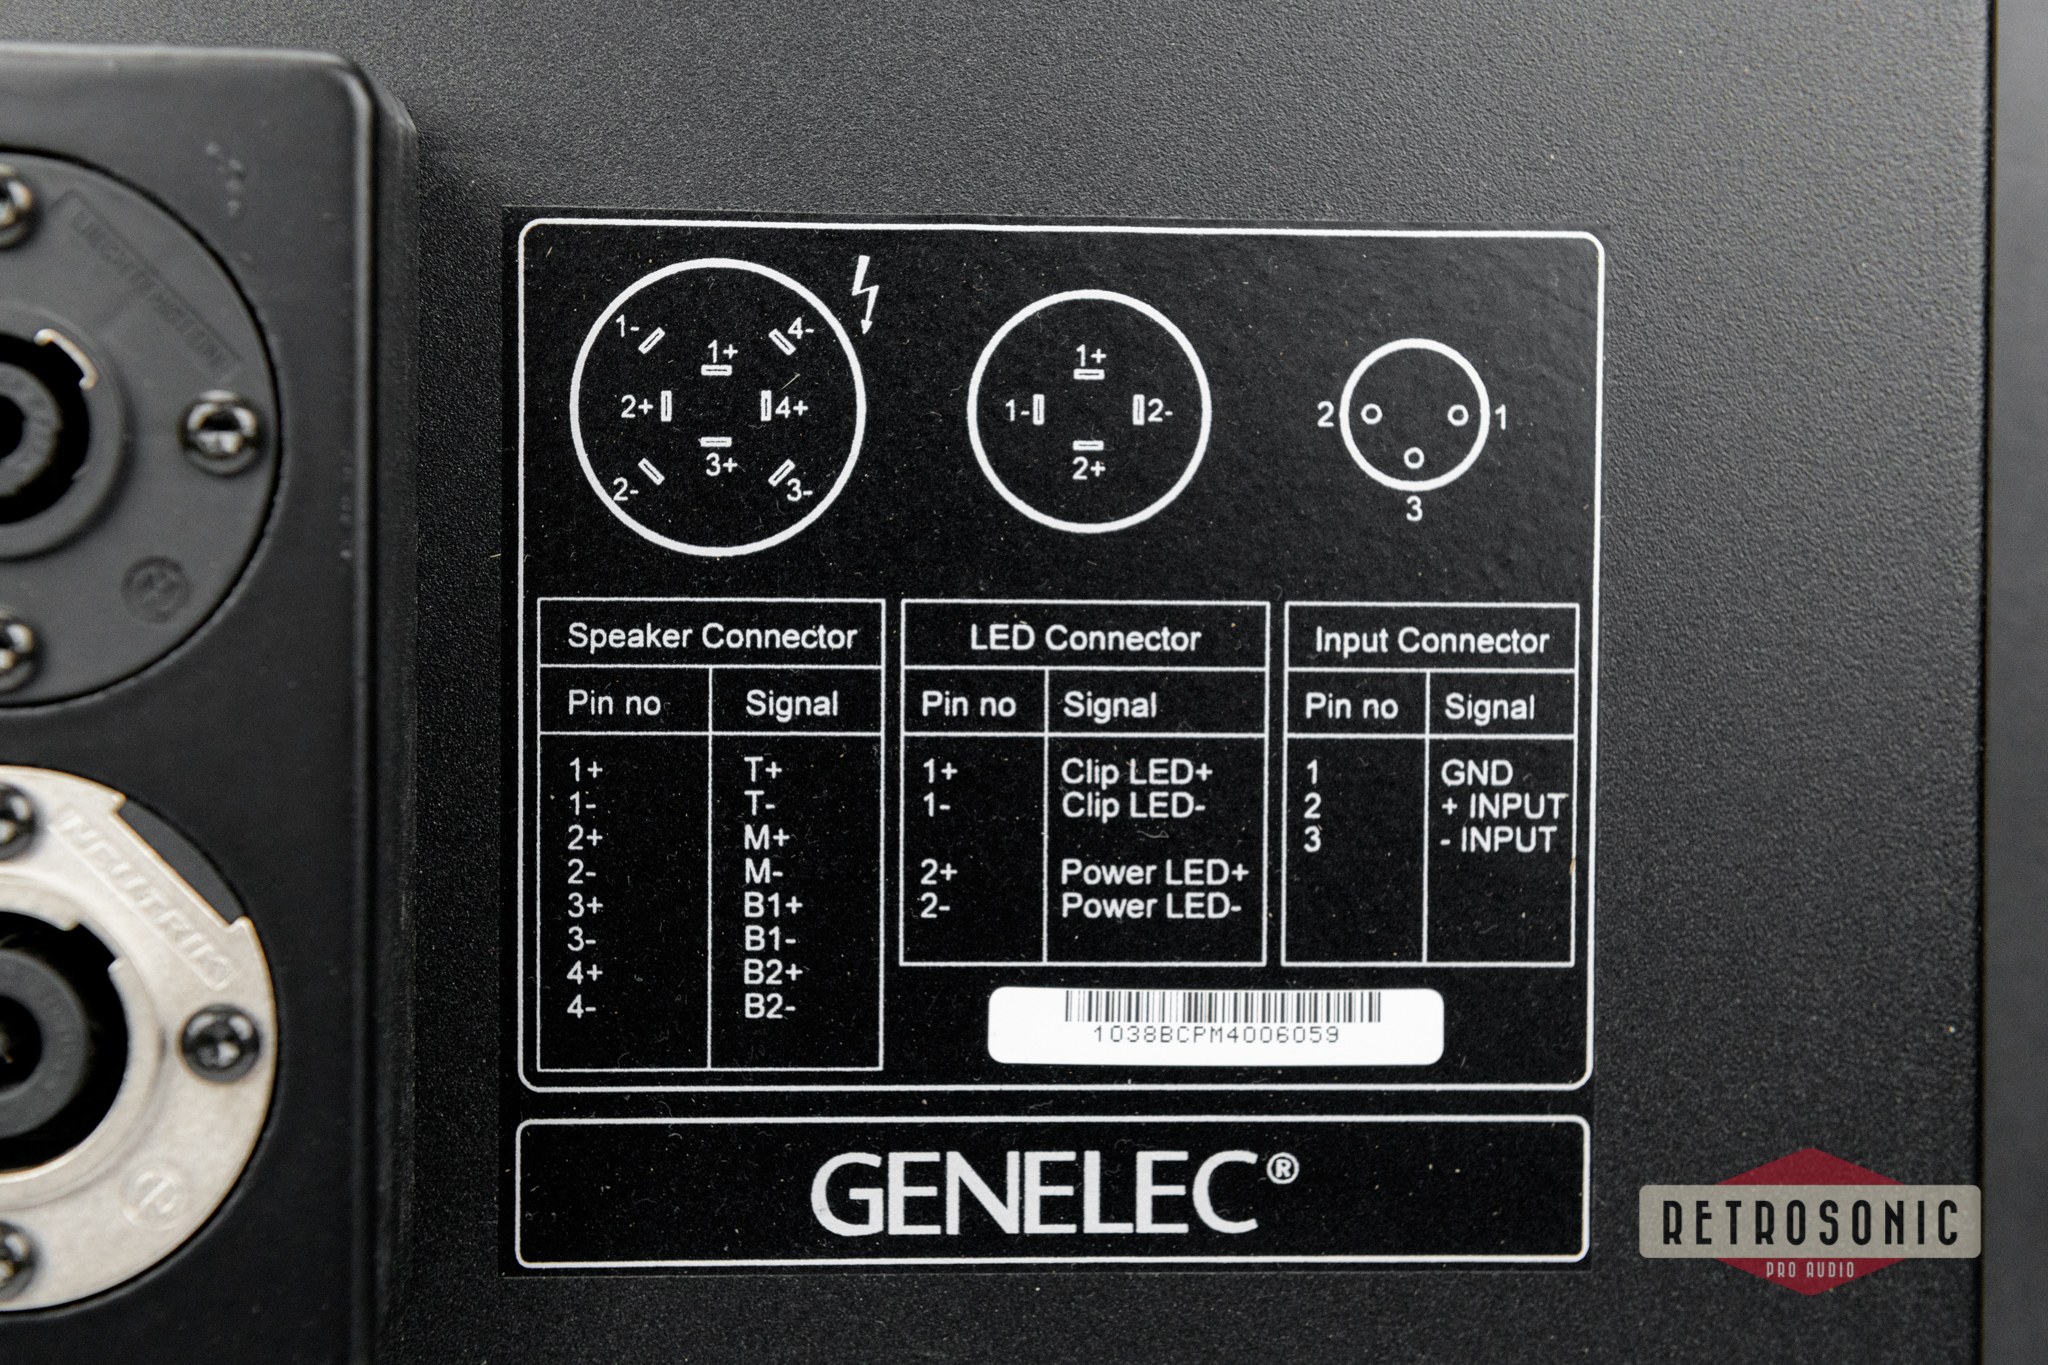 Genelec 1038BC Tri-amplified Active Monitoring System single unit  #1